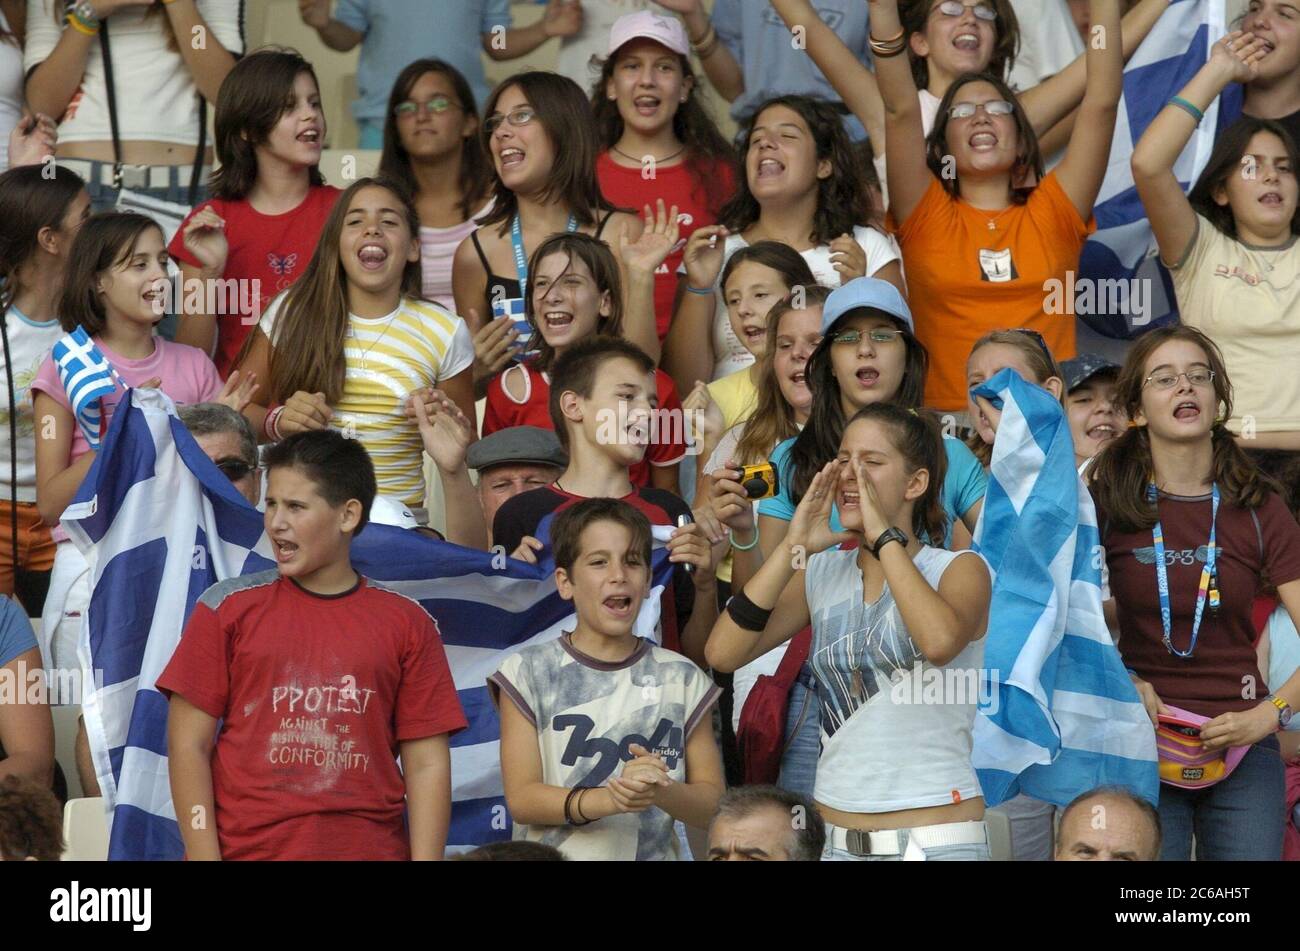 Athens, Greece, September 23 2004: Greek schoolchildren cheer the track athletes at a morning session of the Paralympic Games. Students in Athens got a week off from school to watch the historic events at Olympic Stadium.  ©Bob Daemmrich Stock Photo